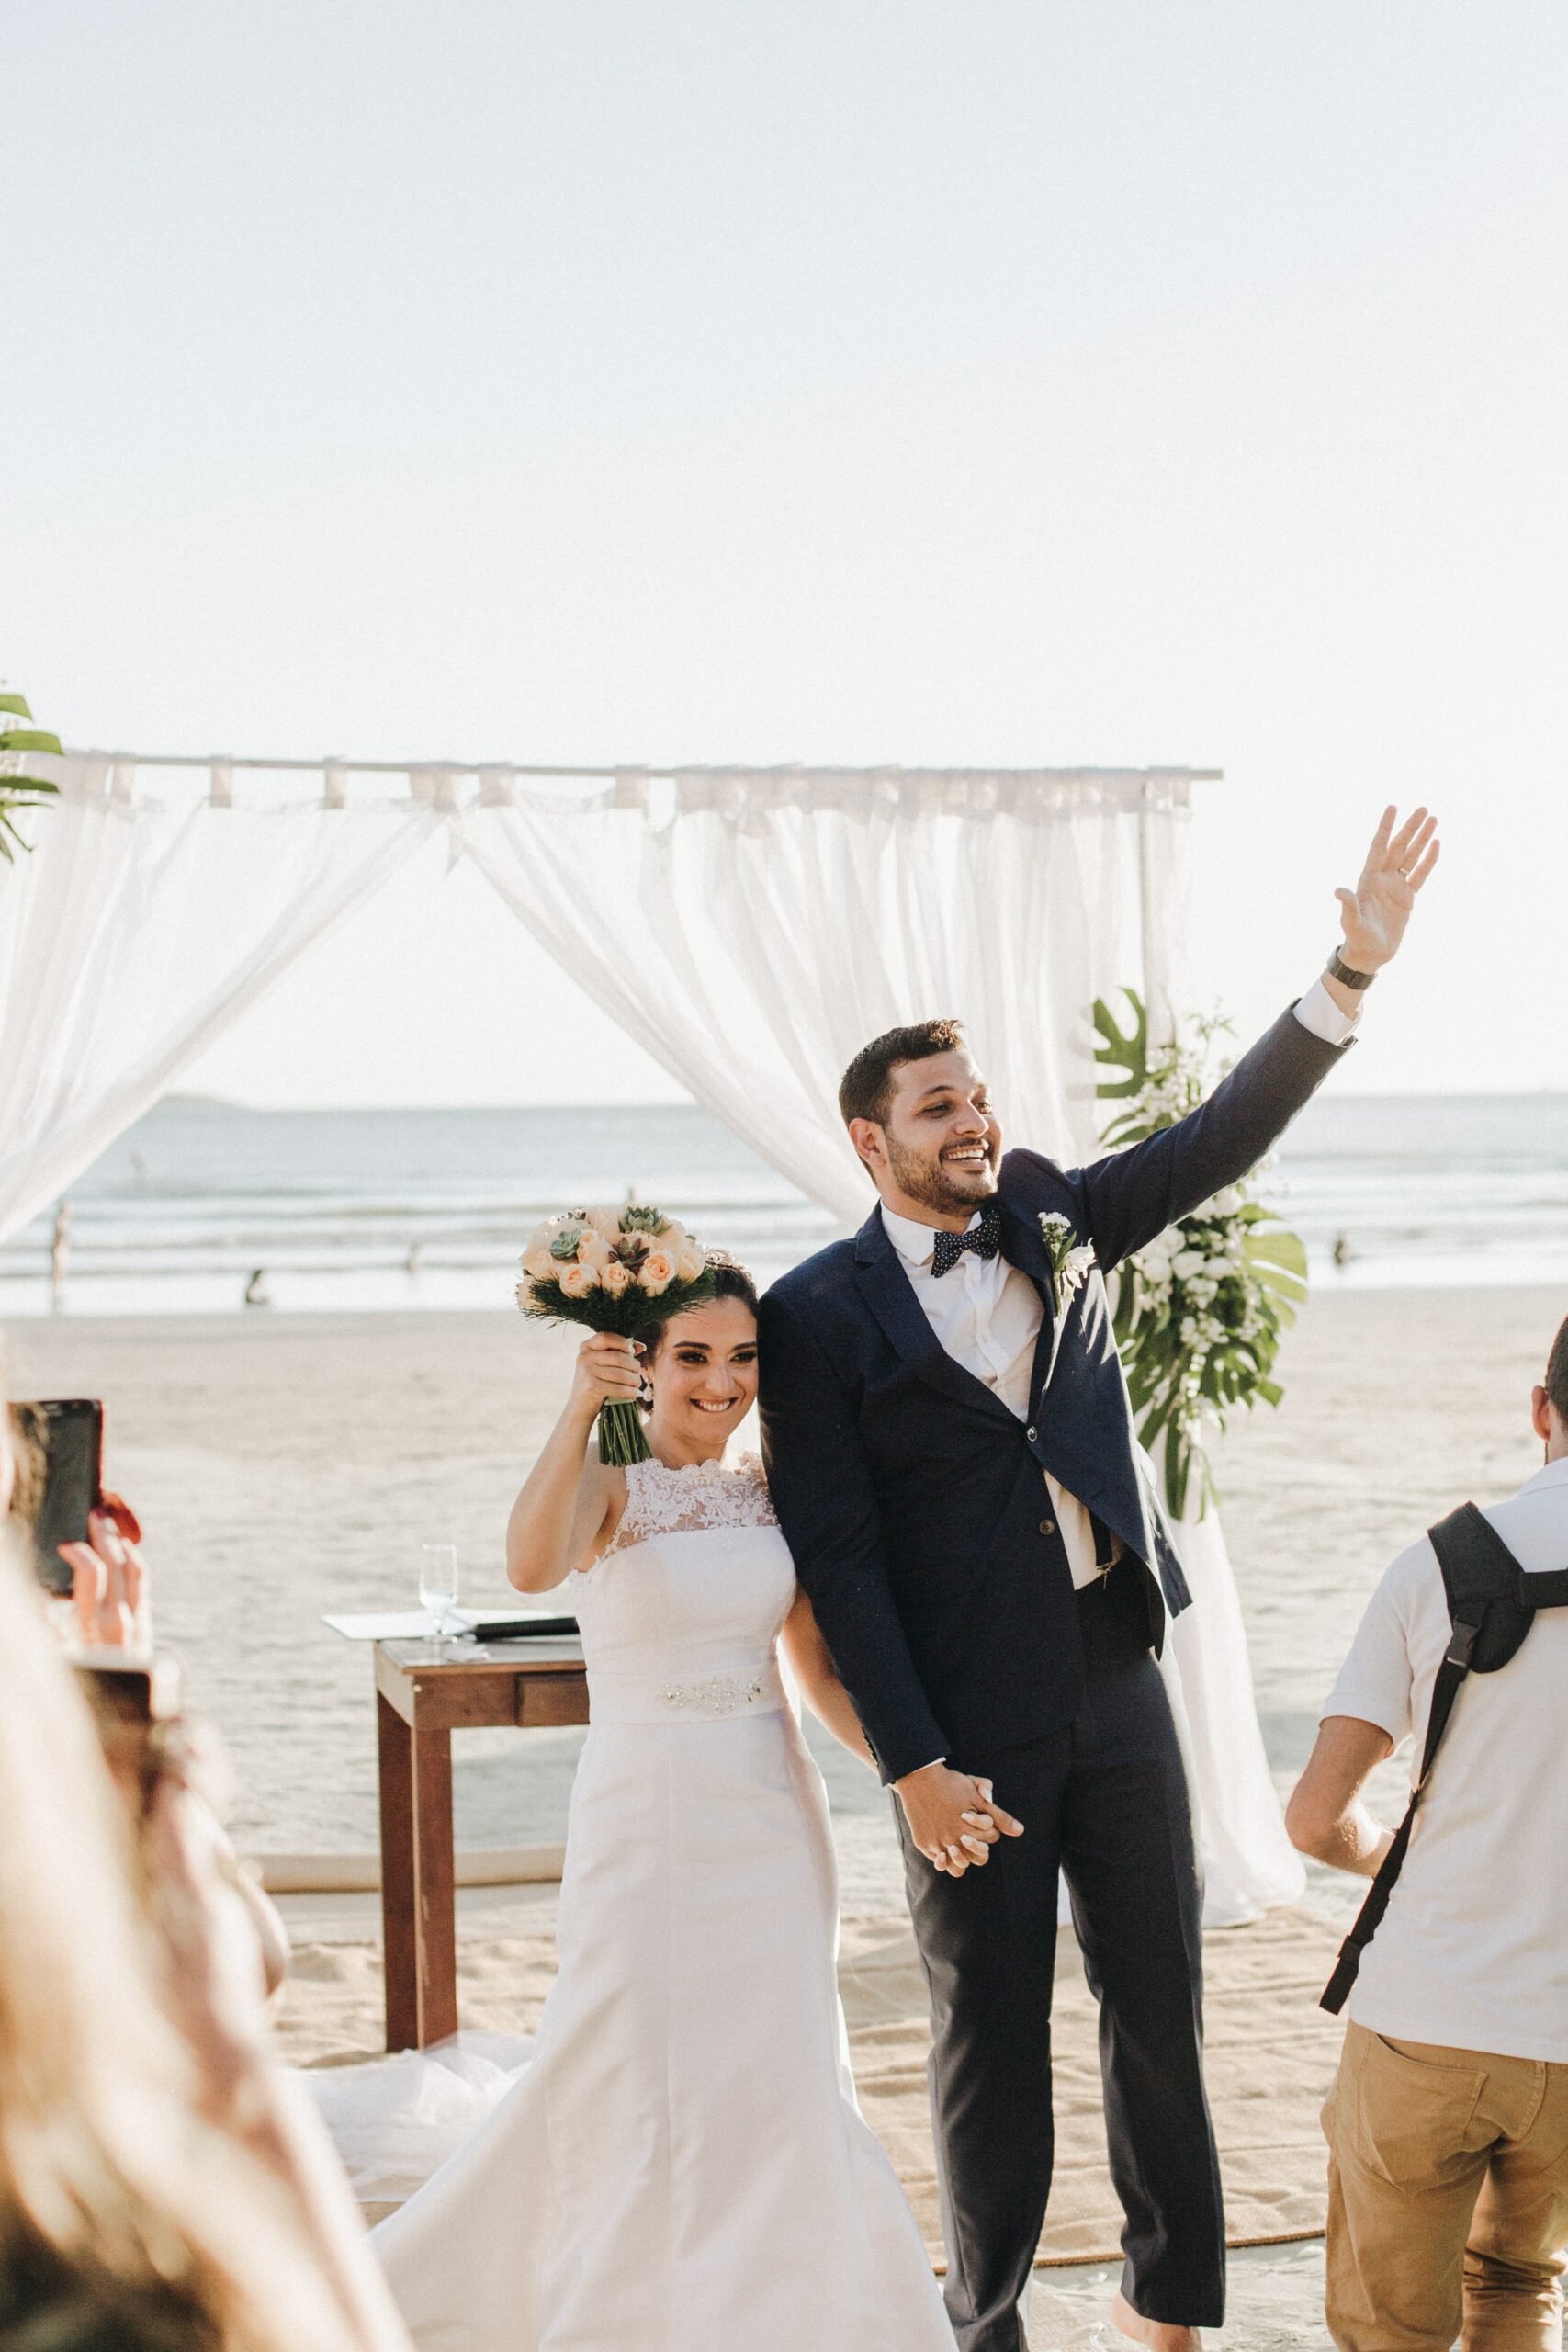 A BEACH WEDDING IS A WEDDING CEREMONY THAT TAKES PLACE ON THE BEACH OR CLOSE TO A BEACH. IT COULD BE A SEASIDE WEDDING RECEPTION, DESTINATION WEDDING OR CEREMONY BY THE OCEAN 